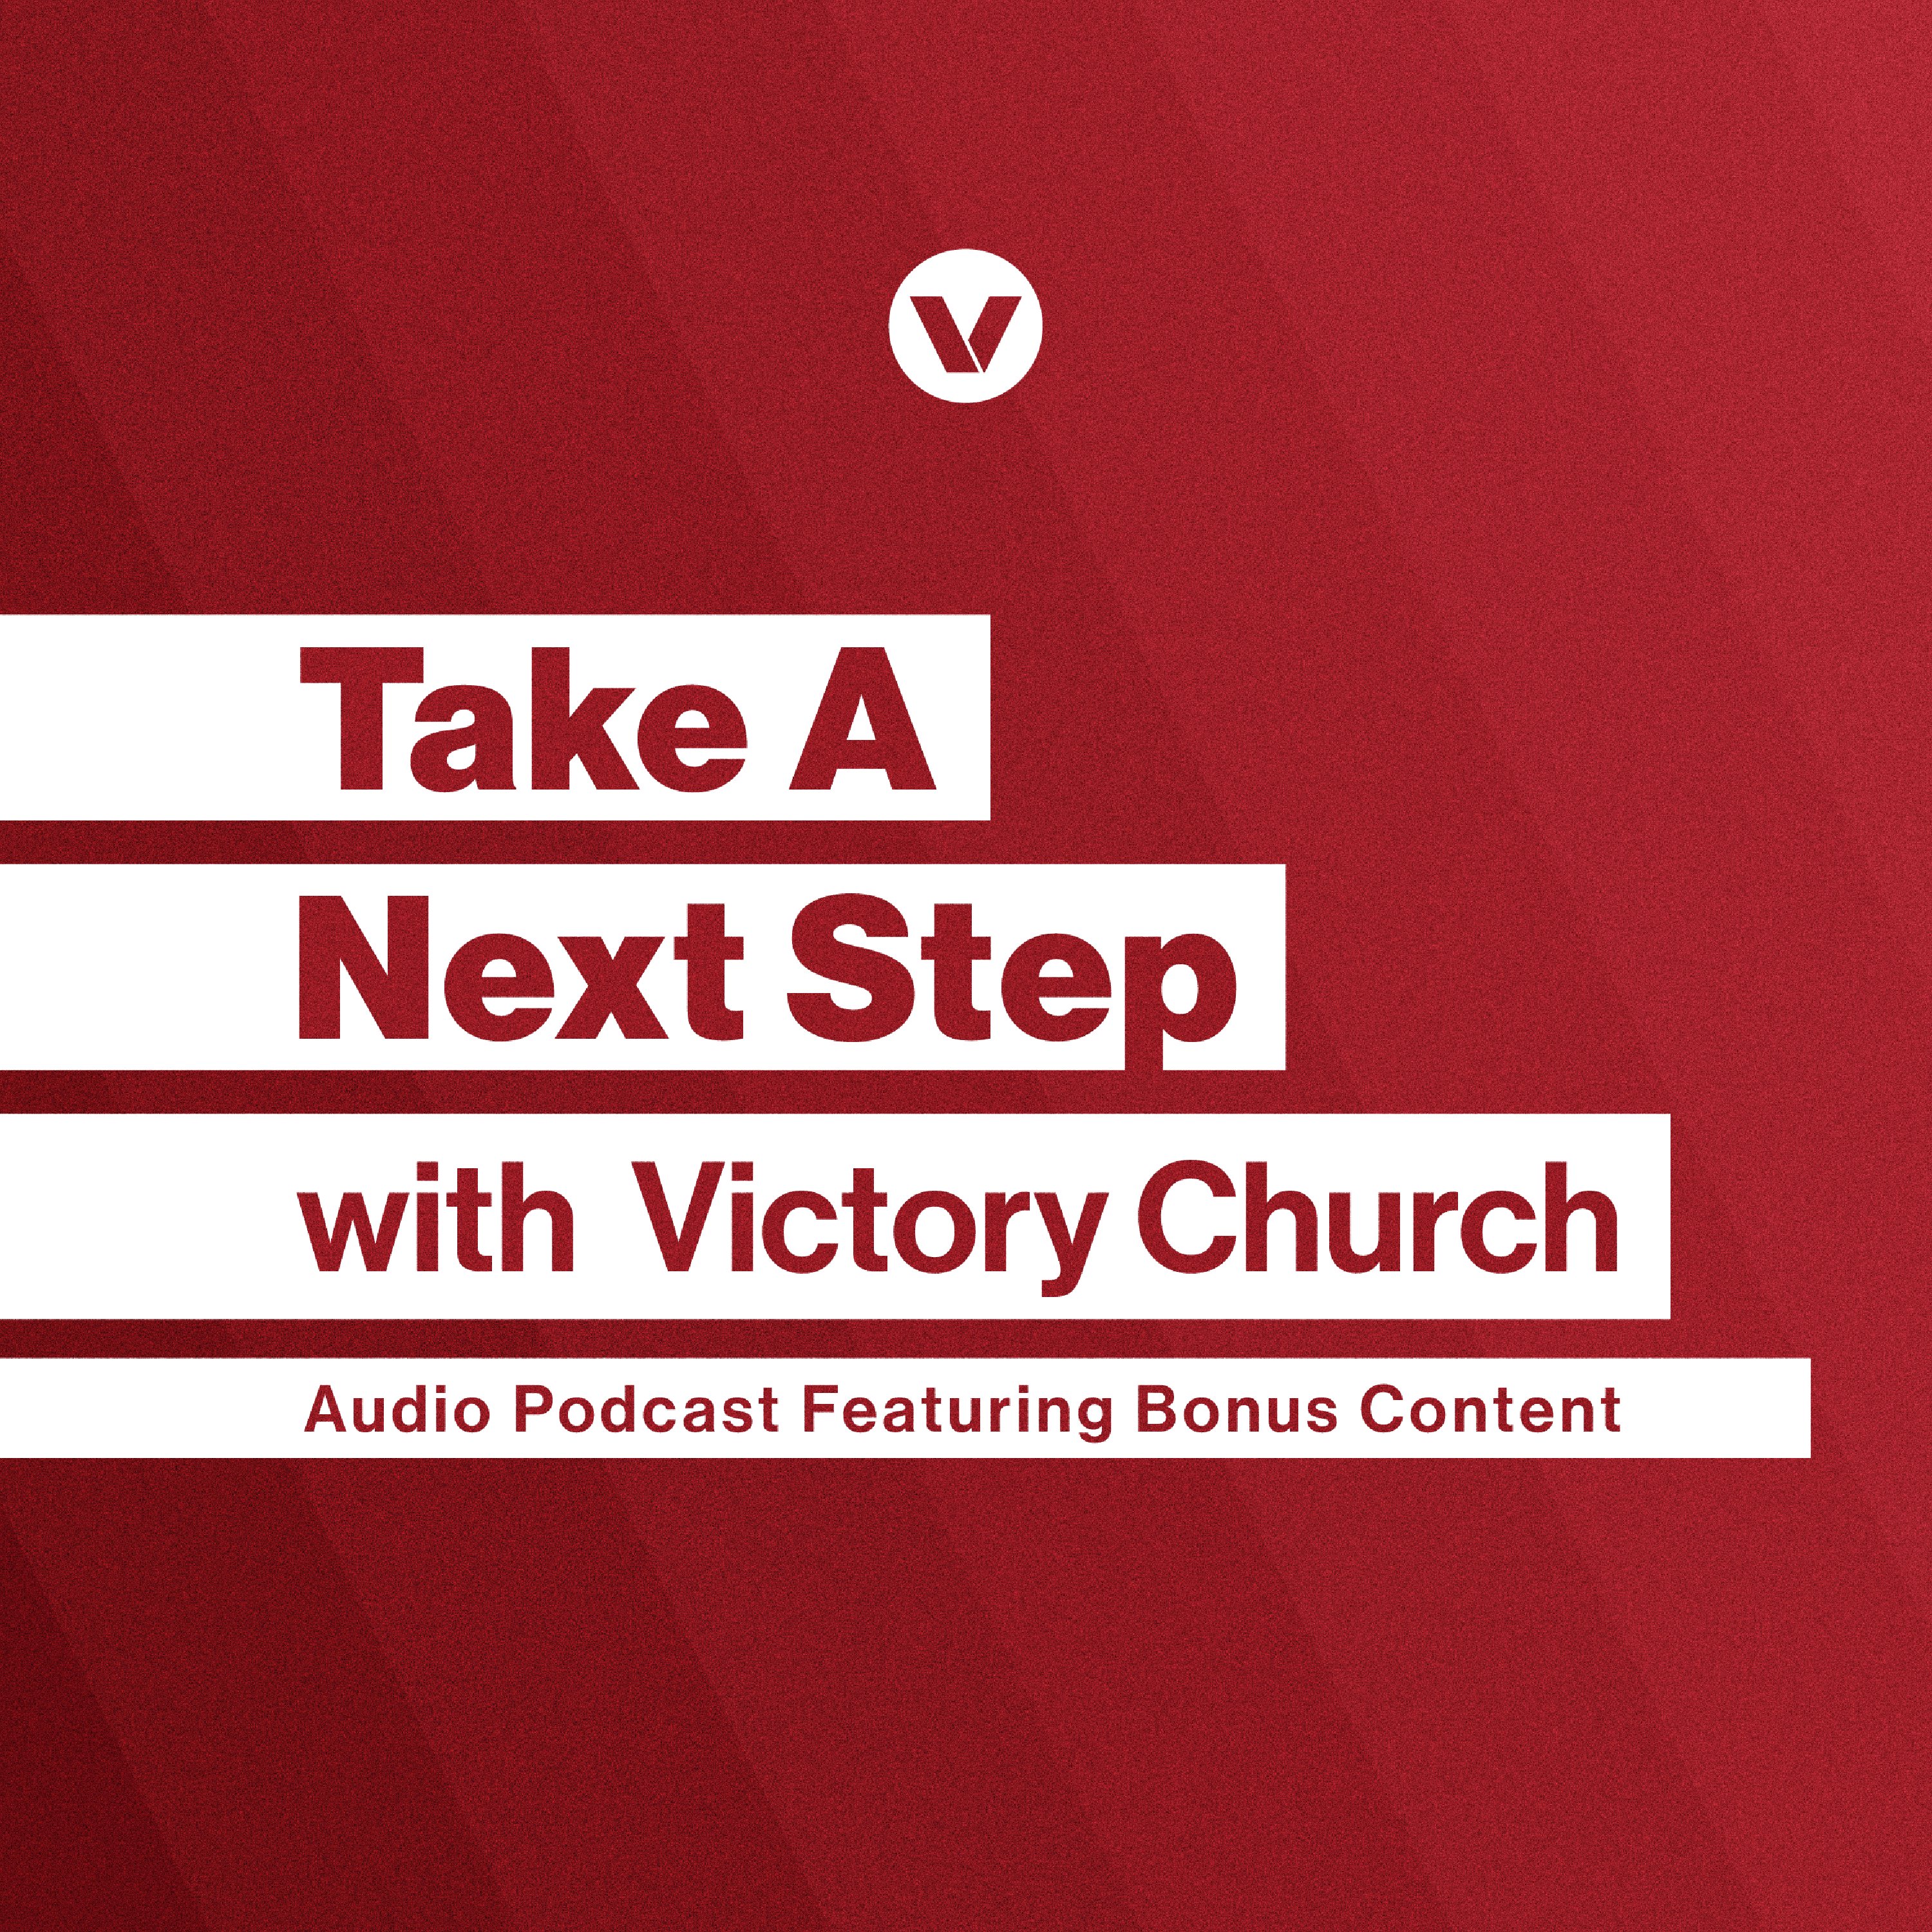 Victory Church Audio Podcasts